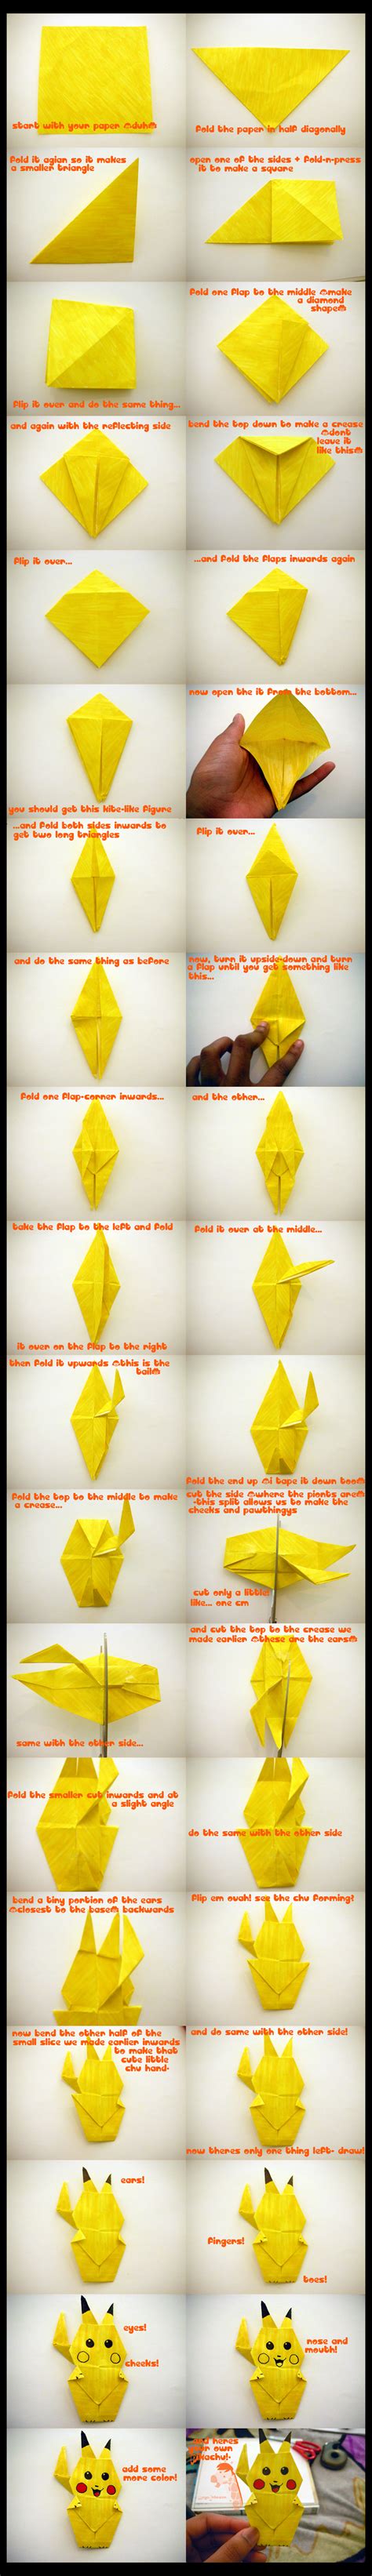 How to Make an Origami Pikachu by wesroz on DeviantArt